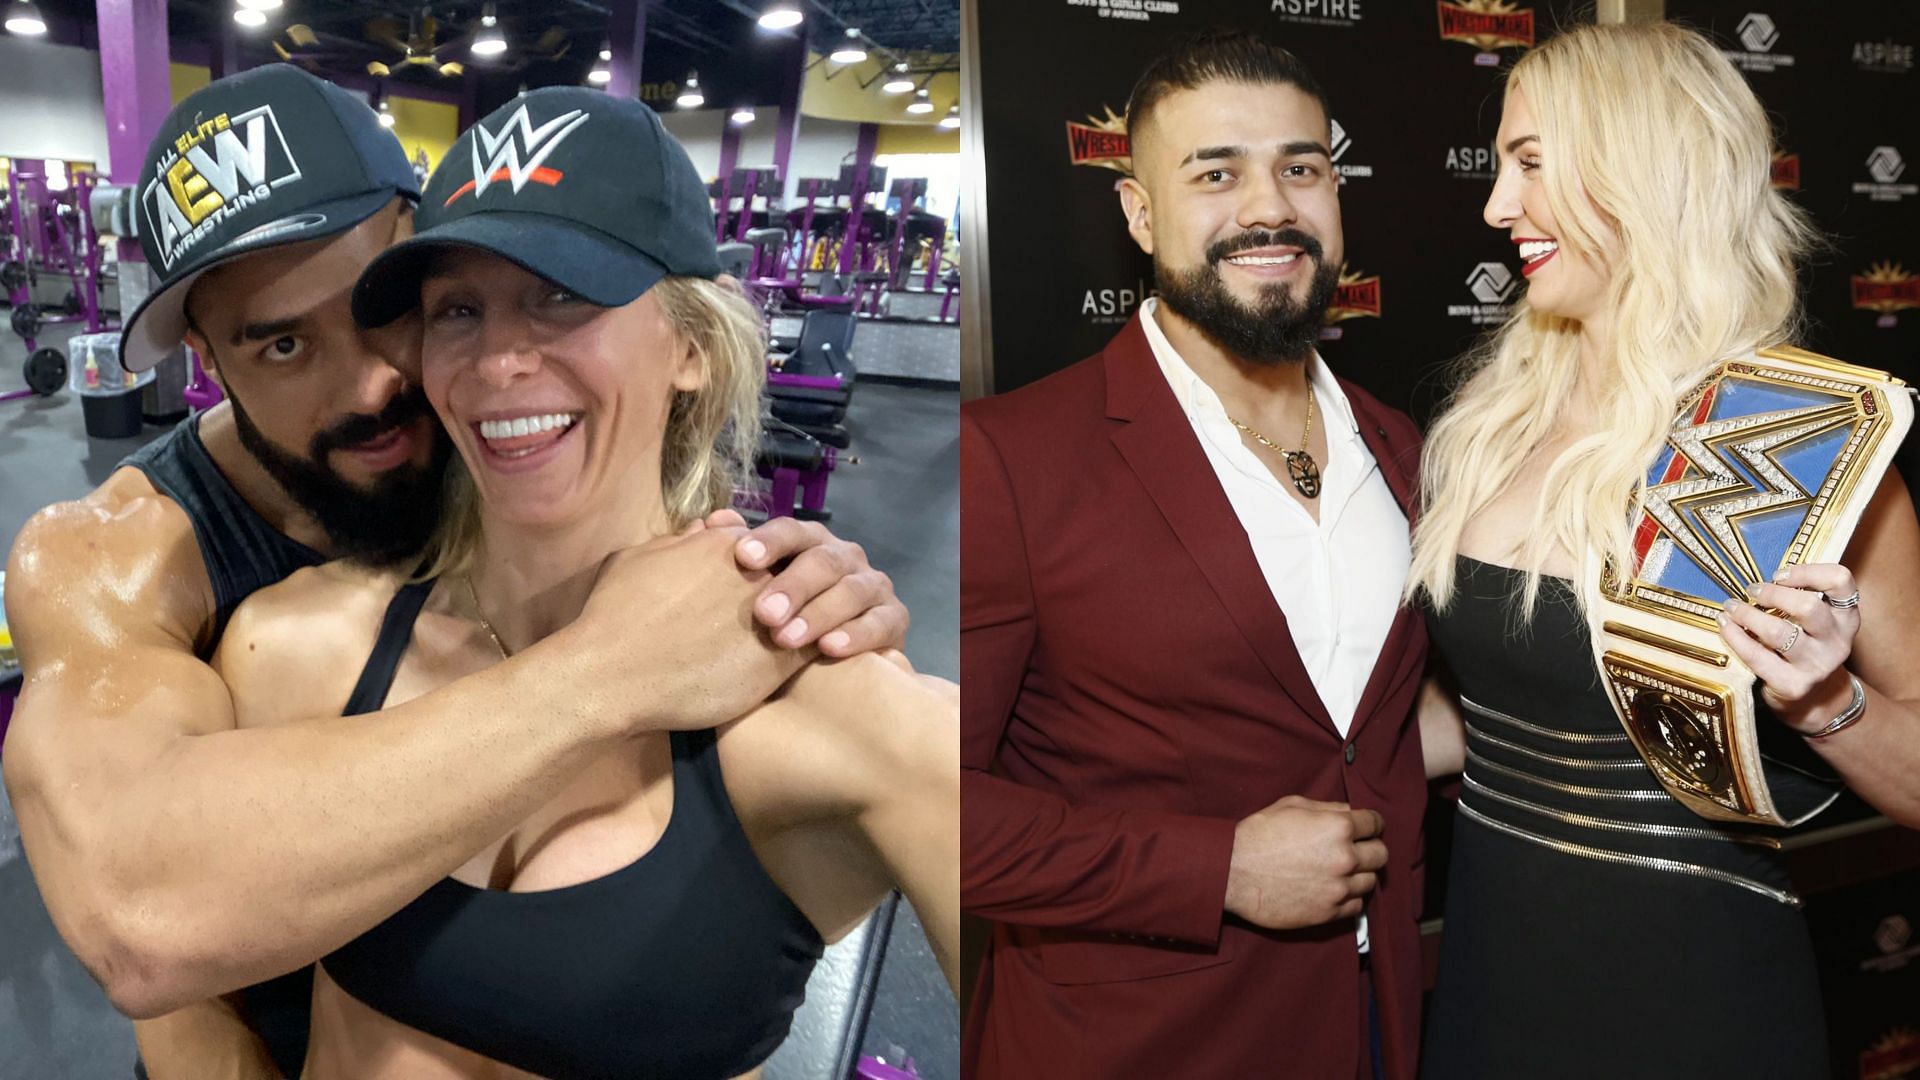 Charlotte Flair and Andrade started dating in 2019